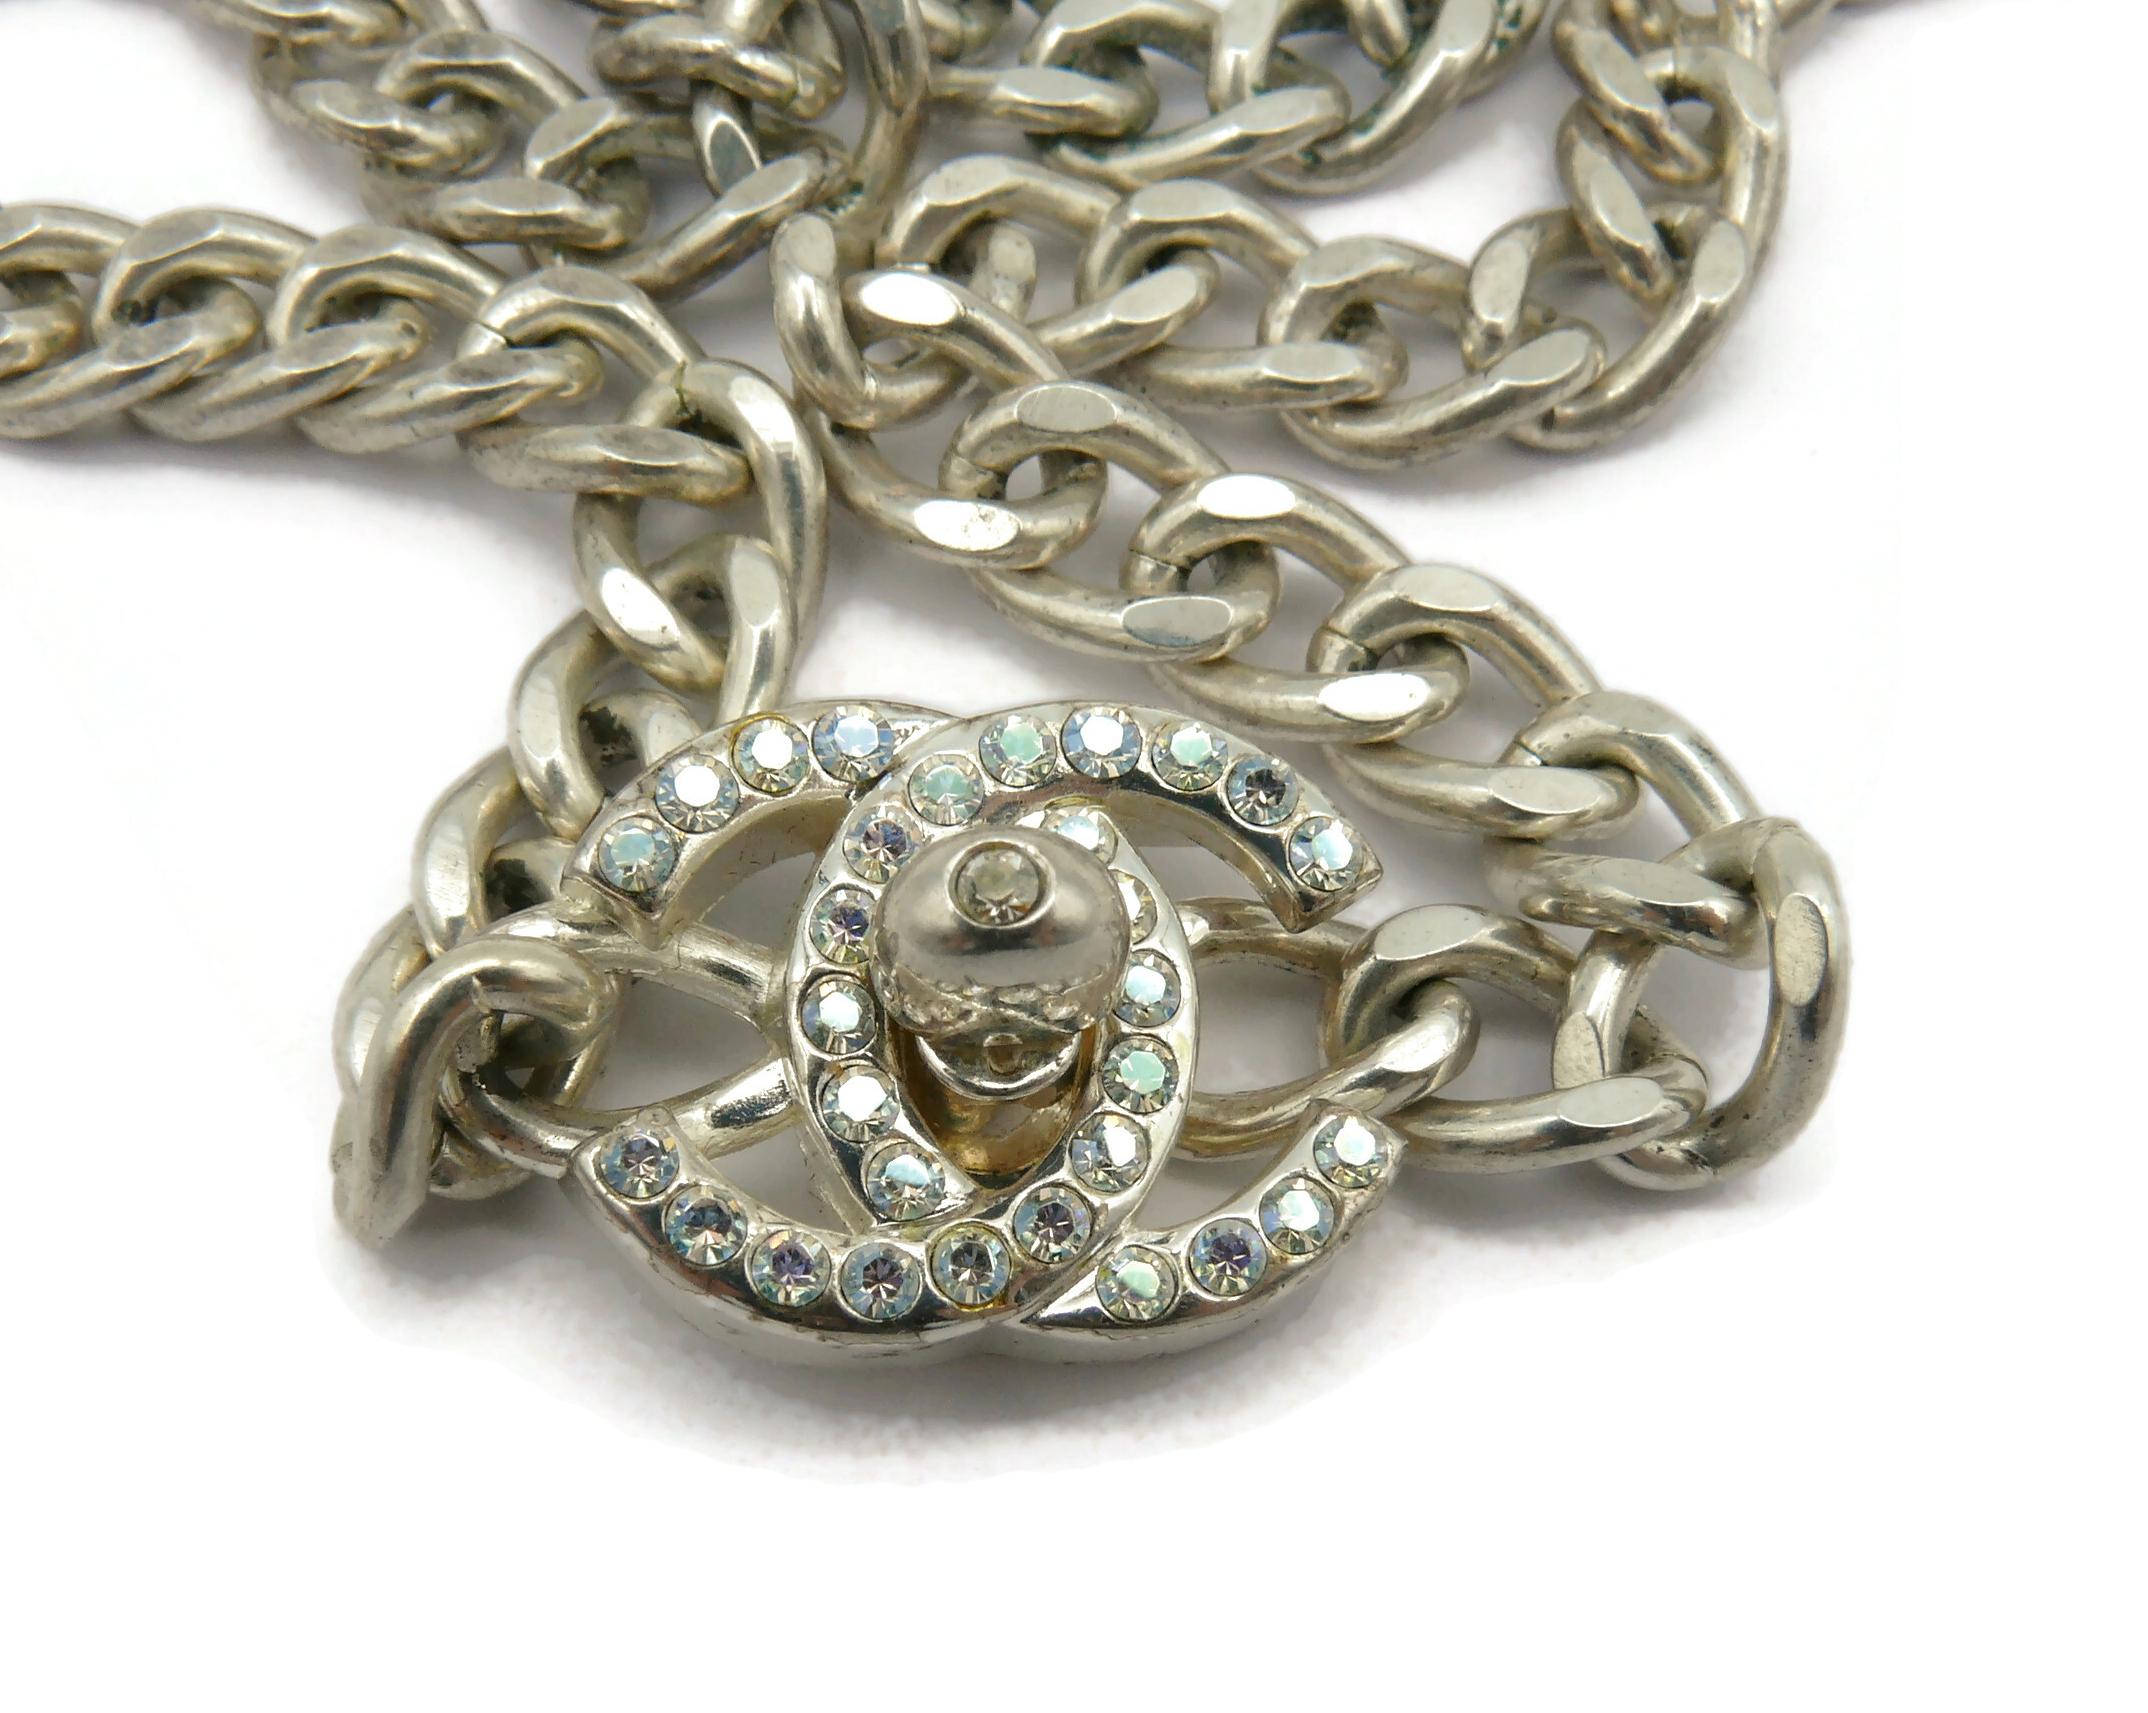 CHANEL by KARL LAGERFELD Vintage 1996 Silver Tone Jewelled Turn-Lock Necklace For Sale 2